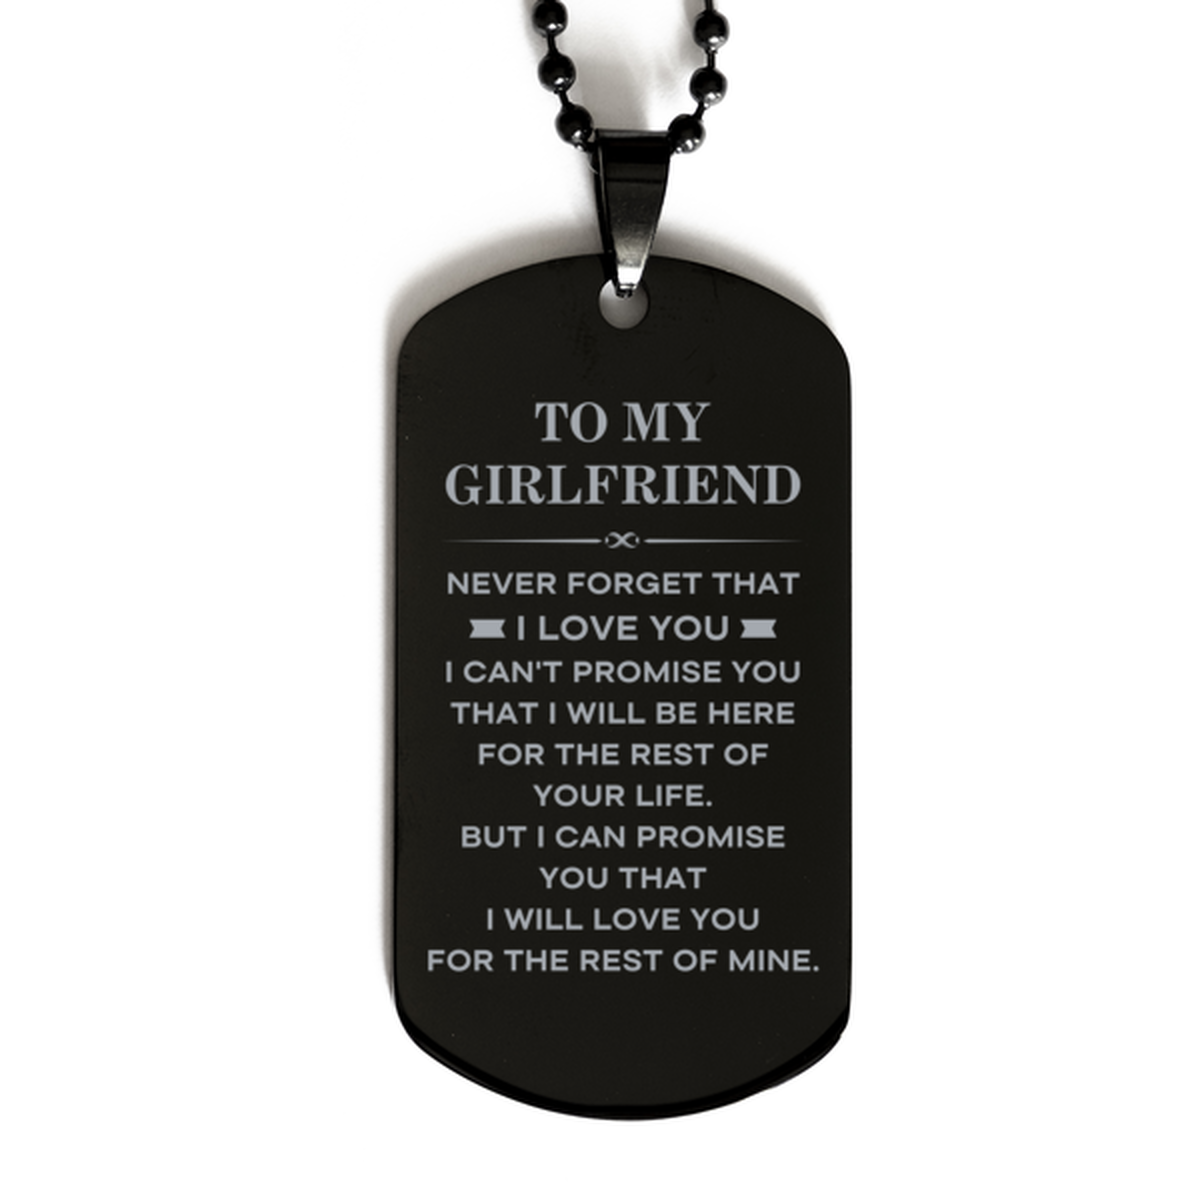 To My Girlfriend Gifts, I will love you for the rest of mine, Love Girlfriend Dog Tag Necklace, Birthday Christmas Unique Black Dog Tag For Girlfriend